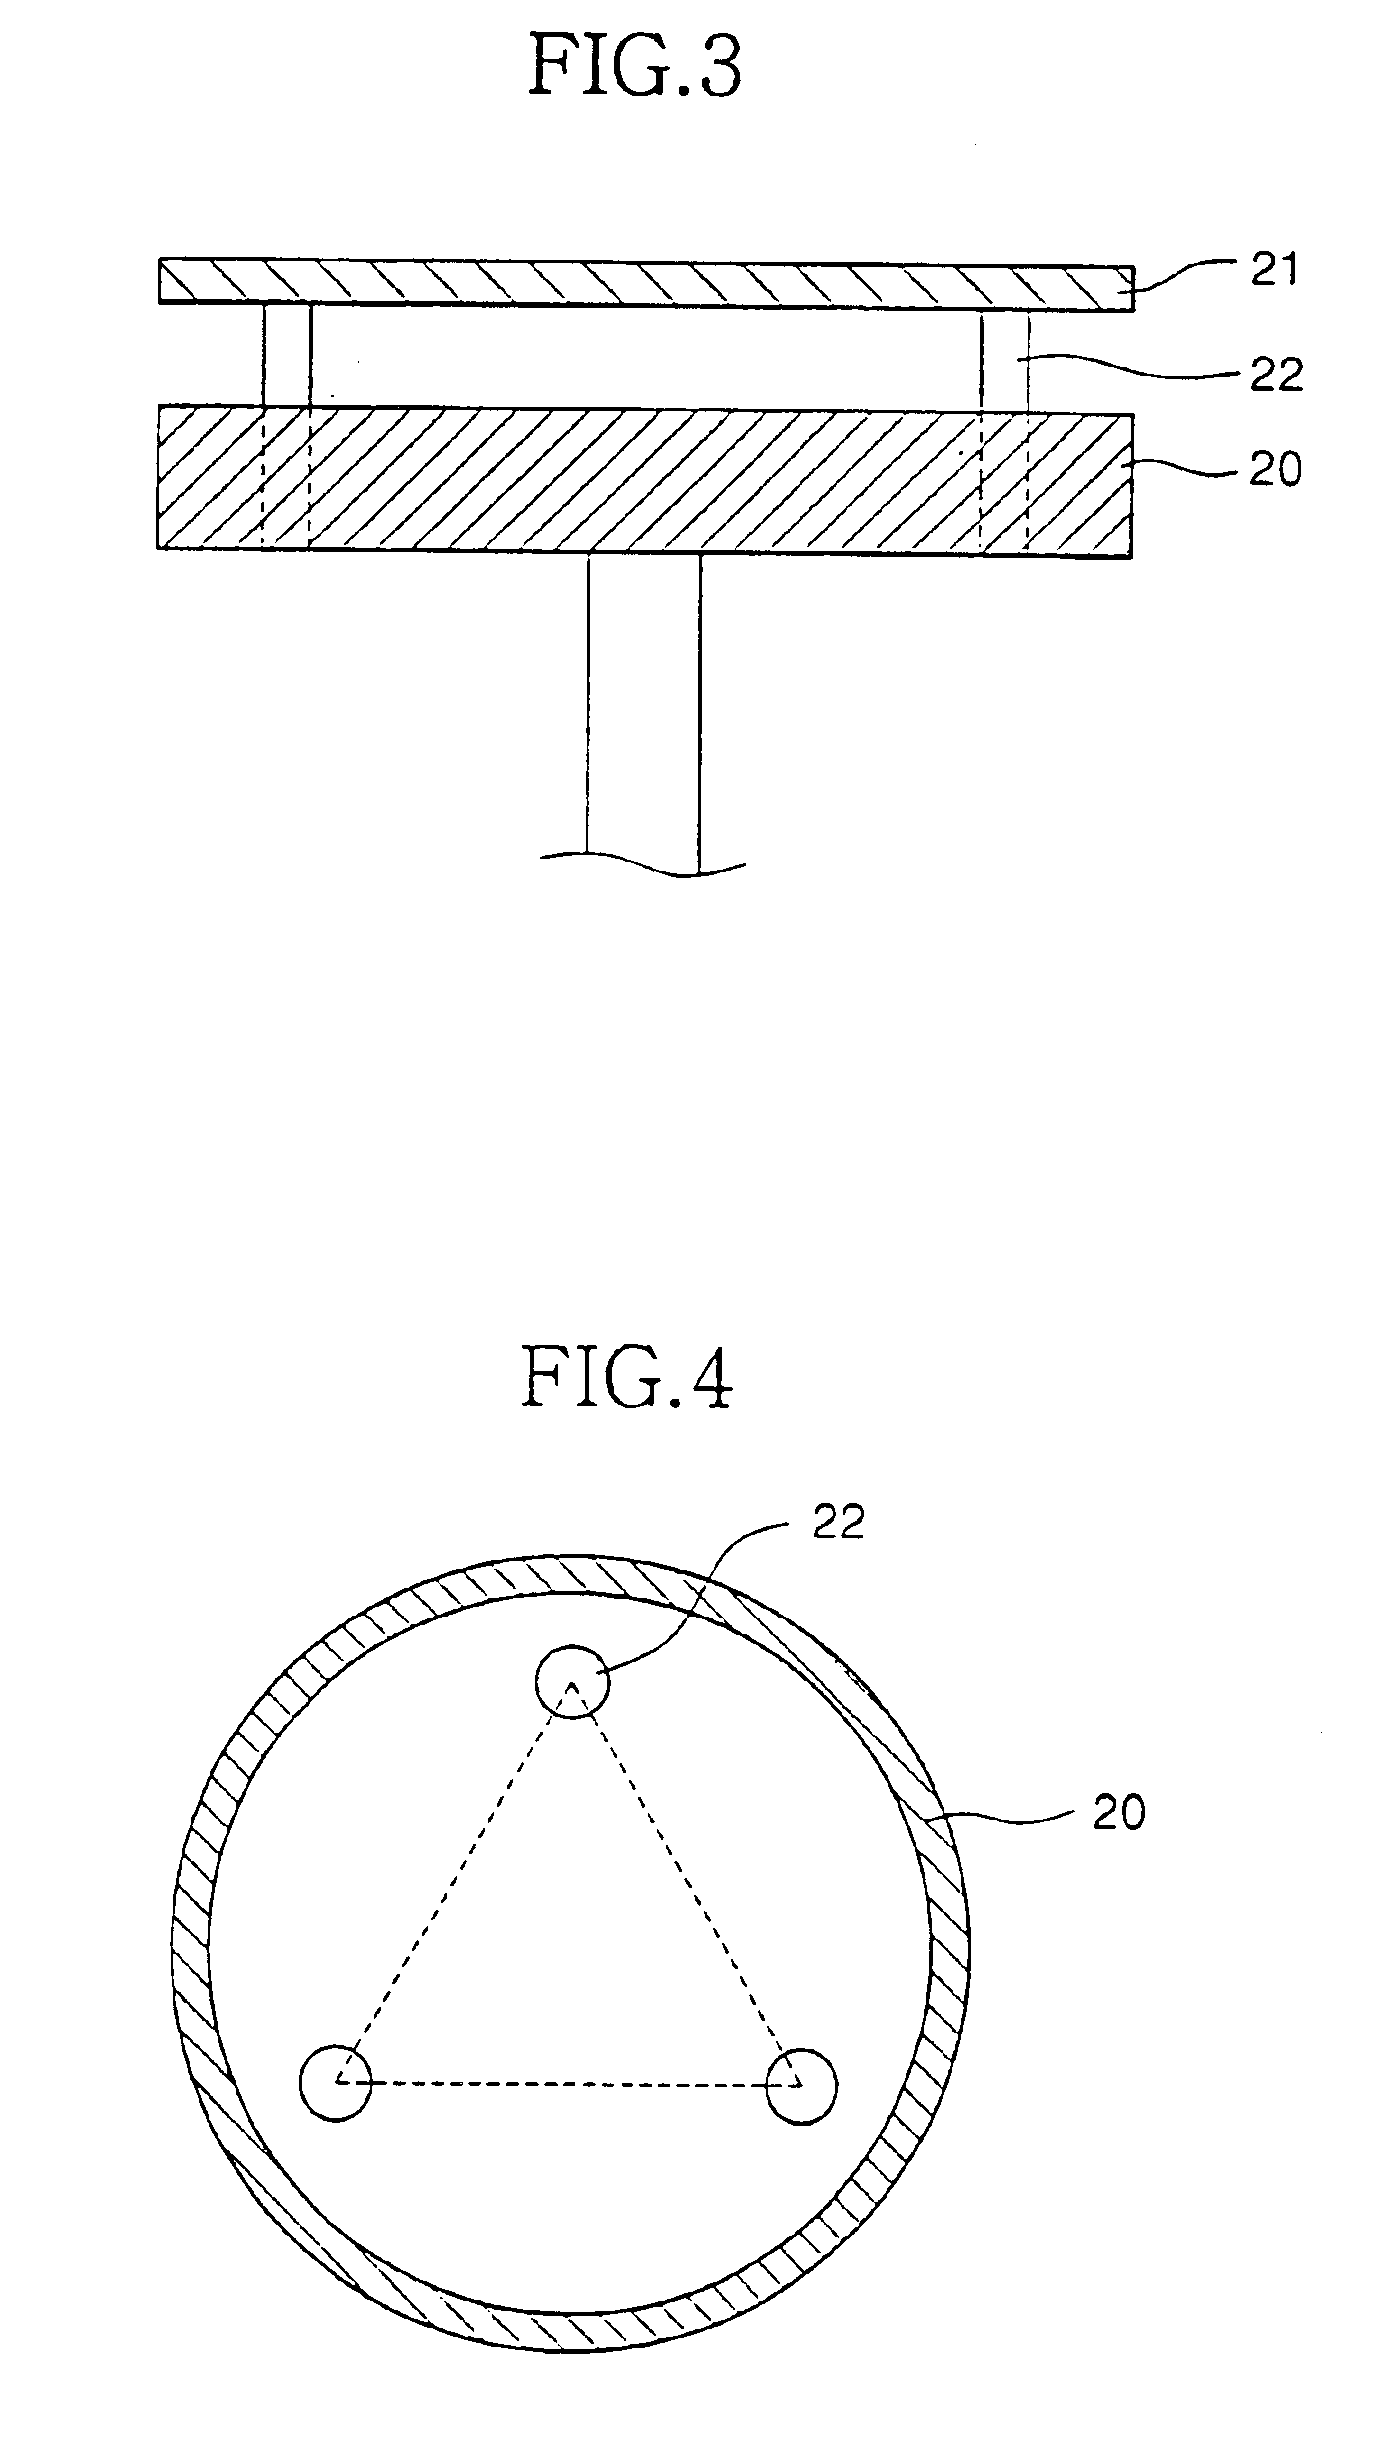 Method for forming a multi-layered structure of a semiconductor device and methods for forming a capacitor and a gate insulation layer using the multi-layered structure